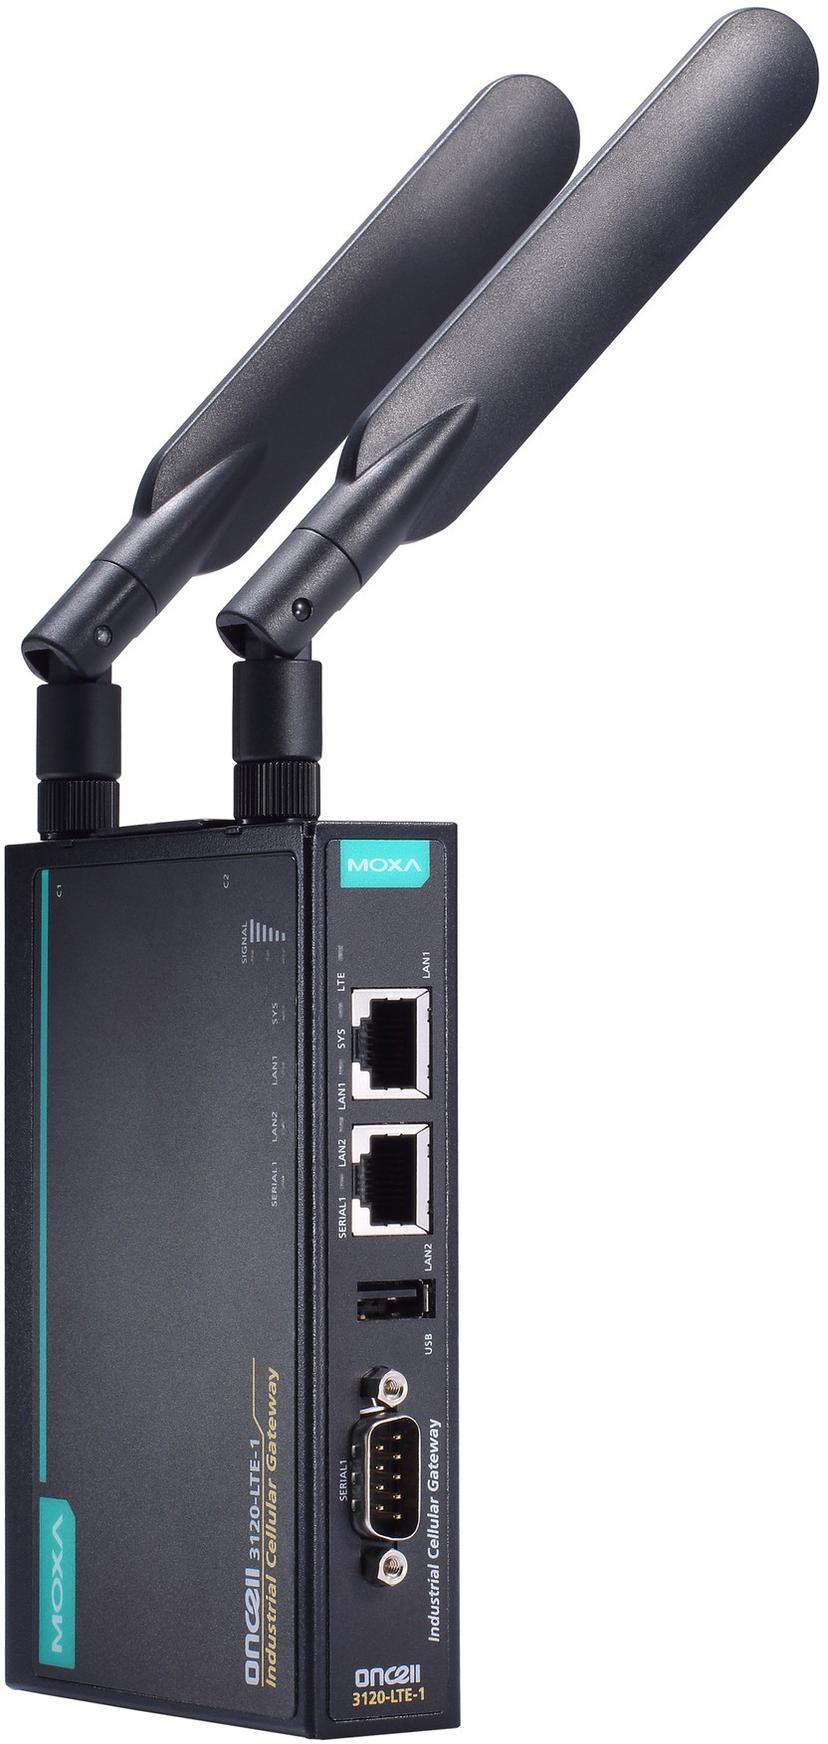 Moxa OnCell 3120-LTE-1 Industriell LTE Gateway Extrem Temp